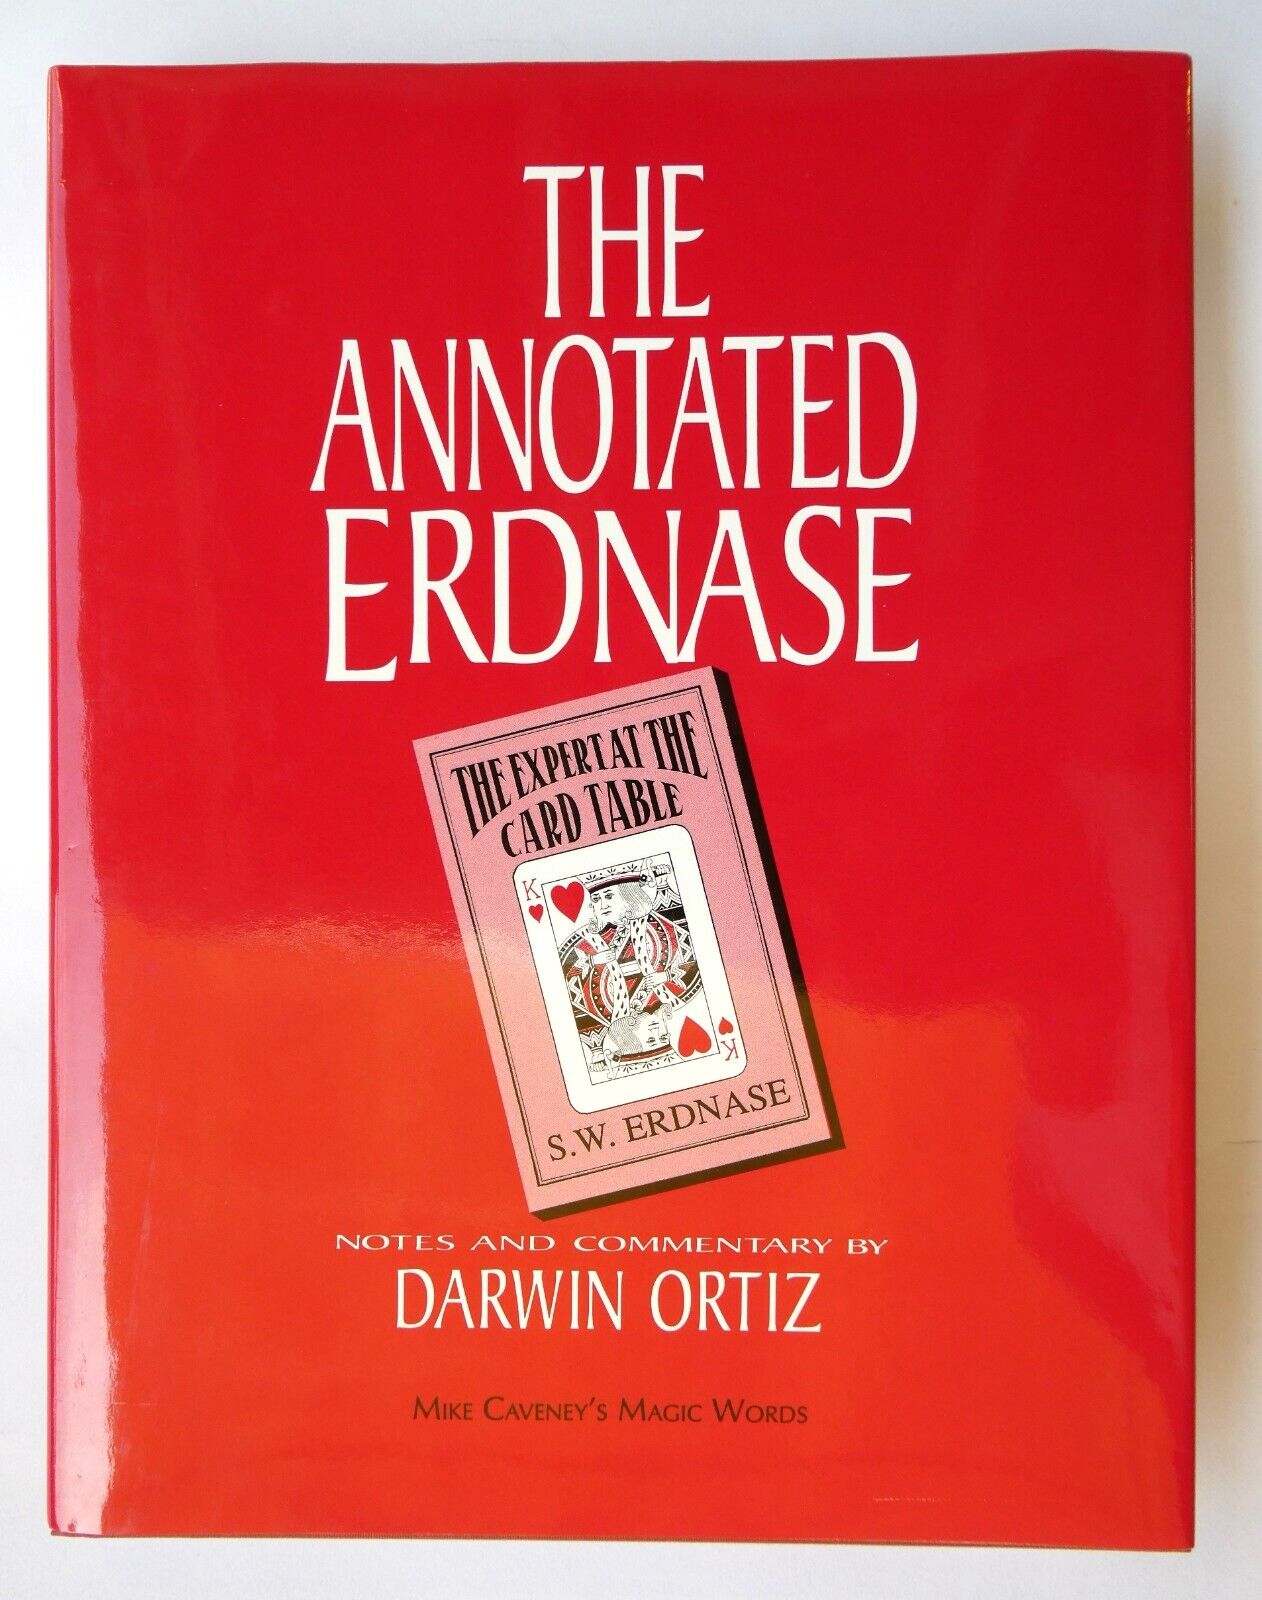 THE ANNOTATED ERDNASE BY DARWIN ORTIZ AND MIKE CAVENEY MAGIC WORDS TRICKS BOOK